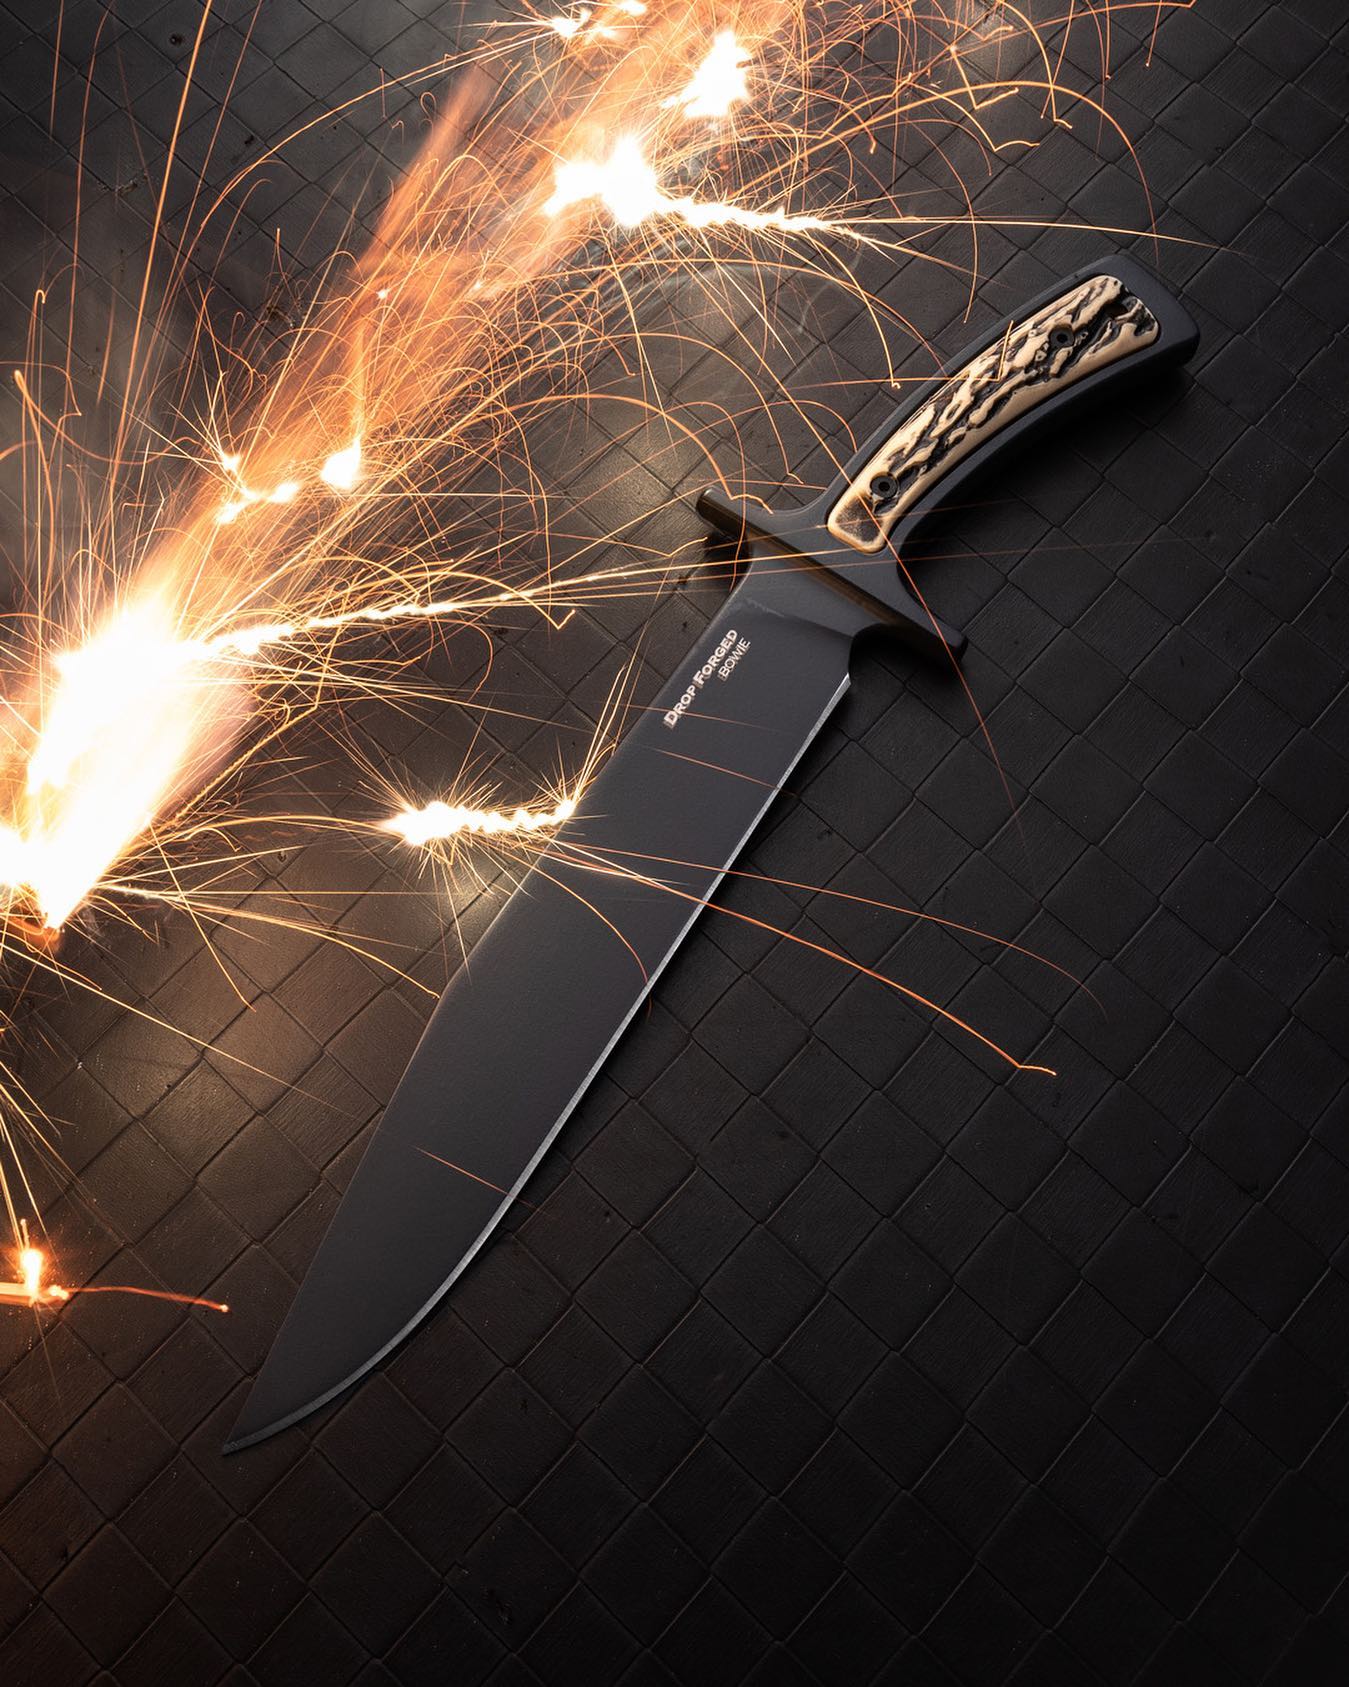 Drop Forged Bowie Knife